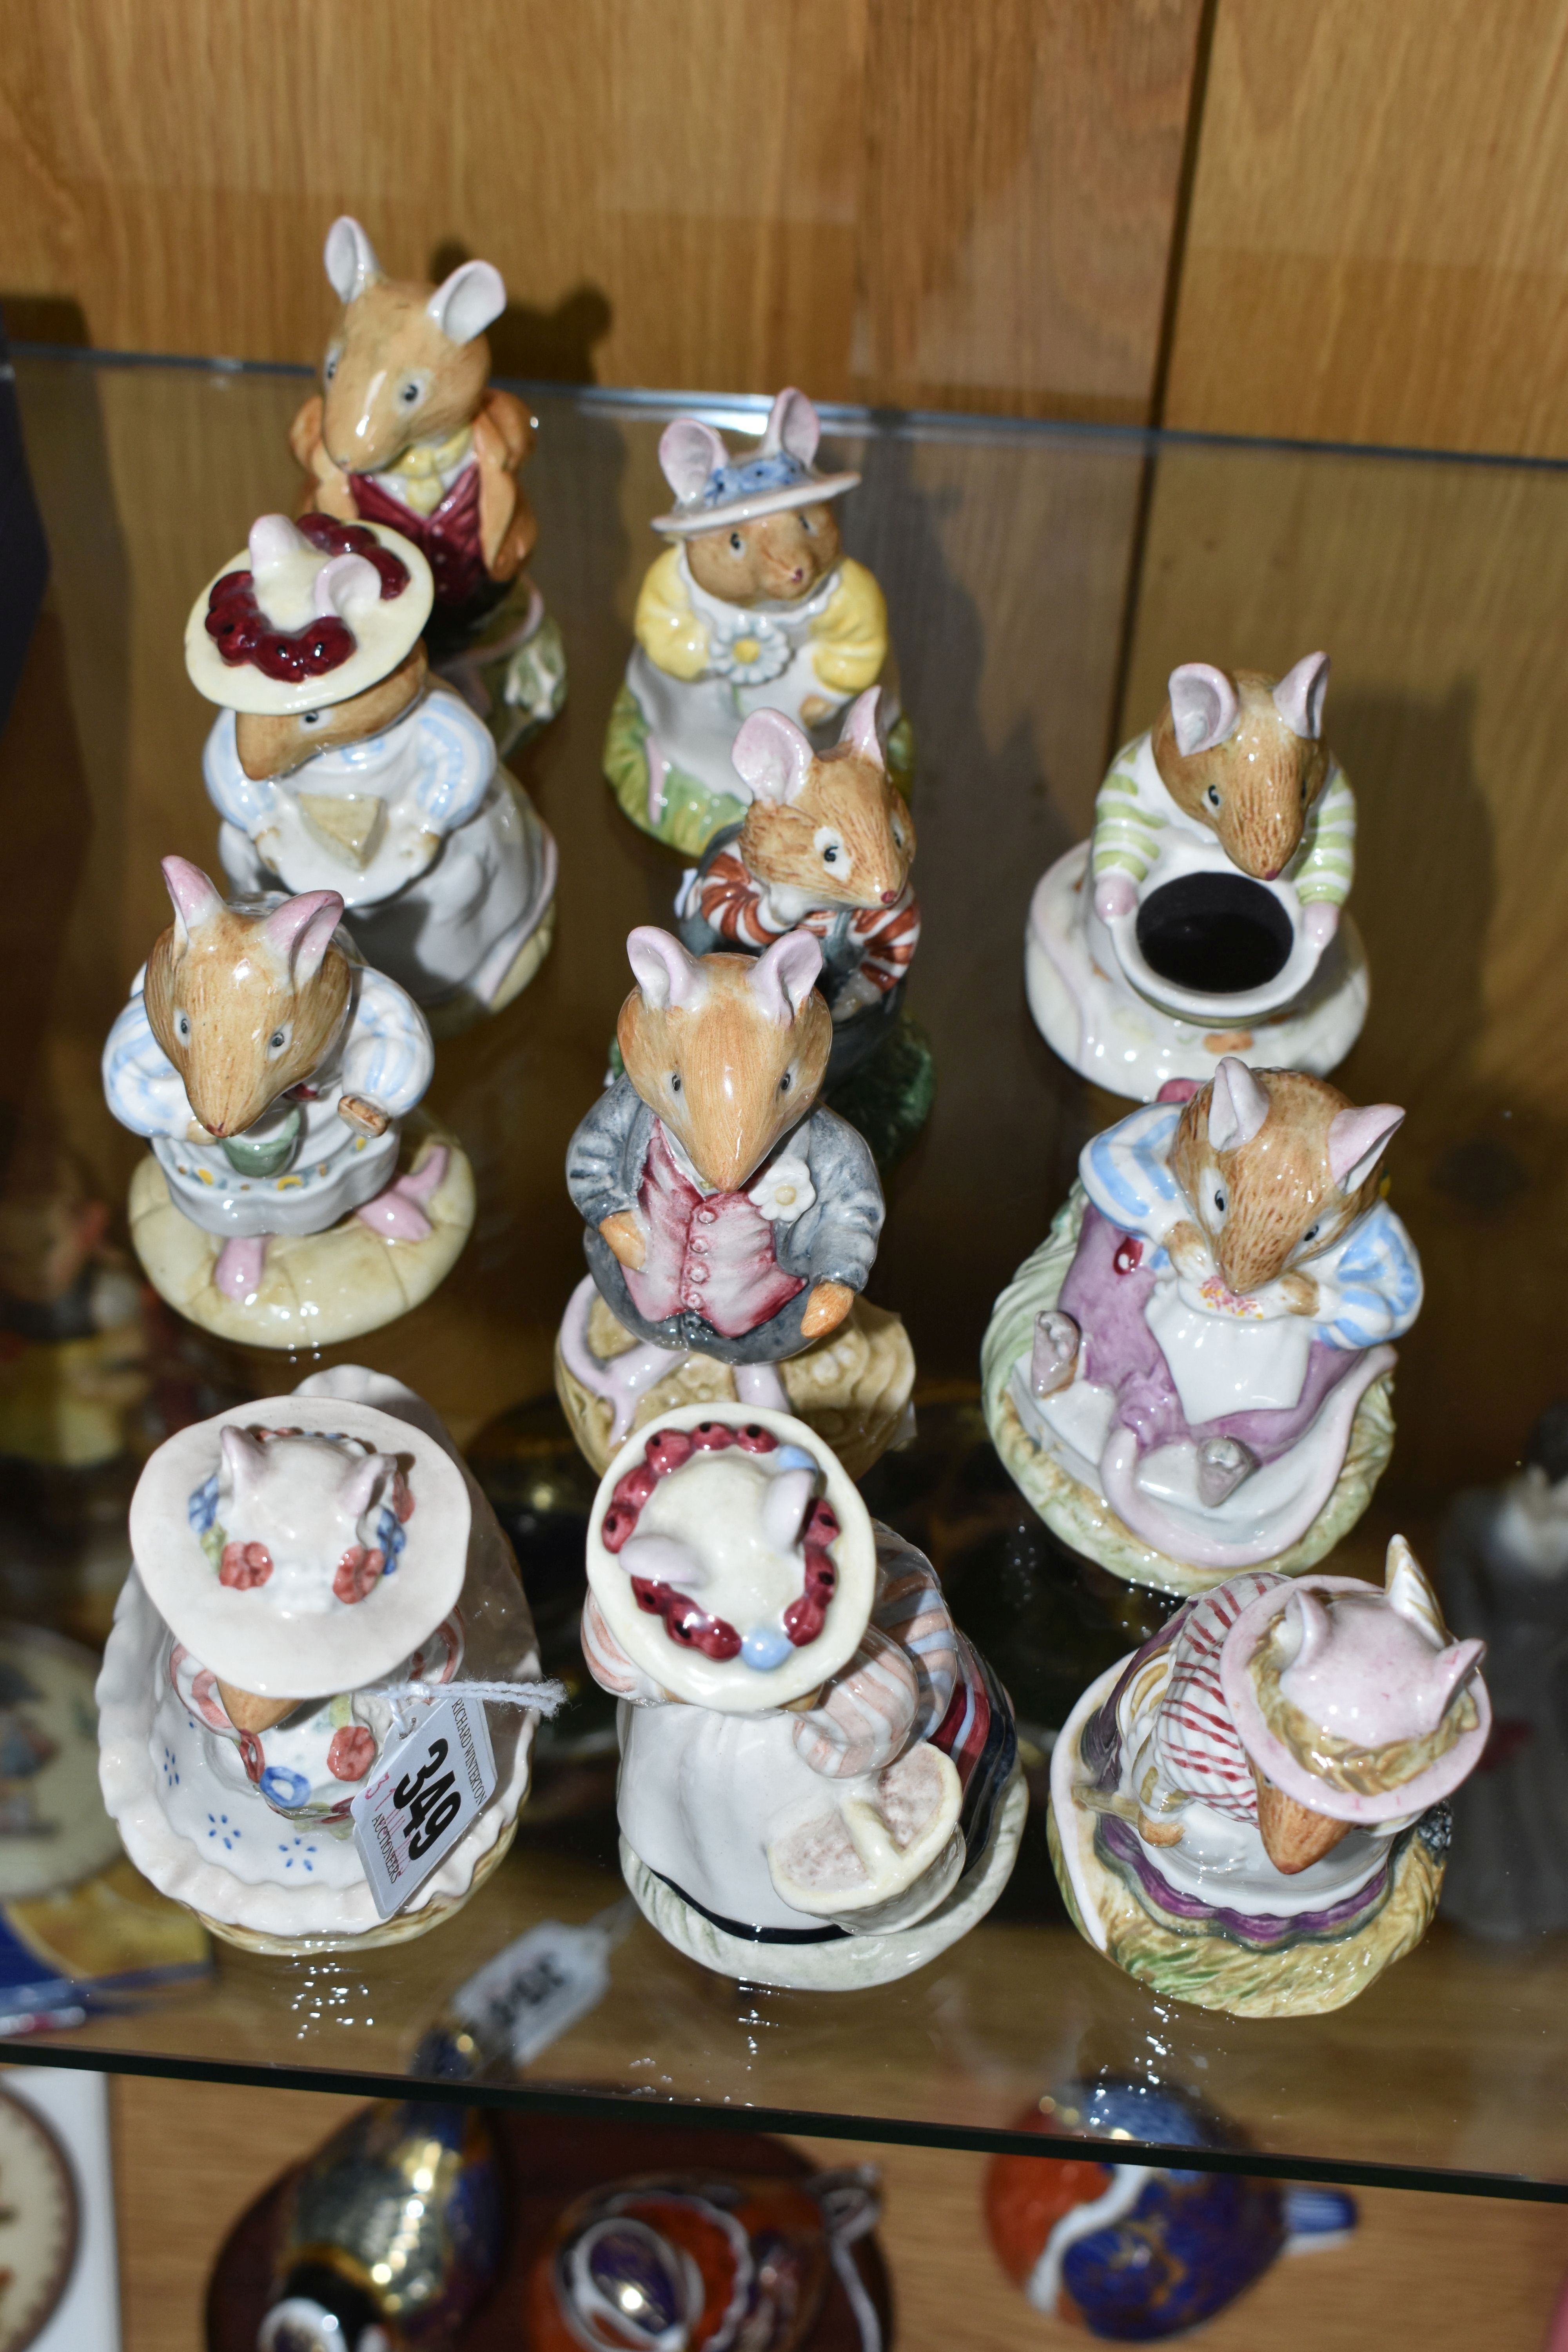 ELEVEN ROYAL DOULTON BRAMBLY HEDGE FIGURES, comprising 'Poppy Eyebright' DBH1, 'Mr. Apple' DBH2, ' - Image 2 of 6